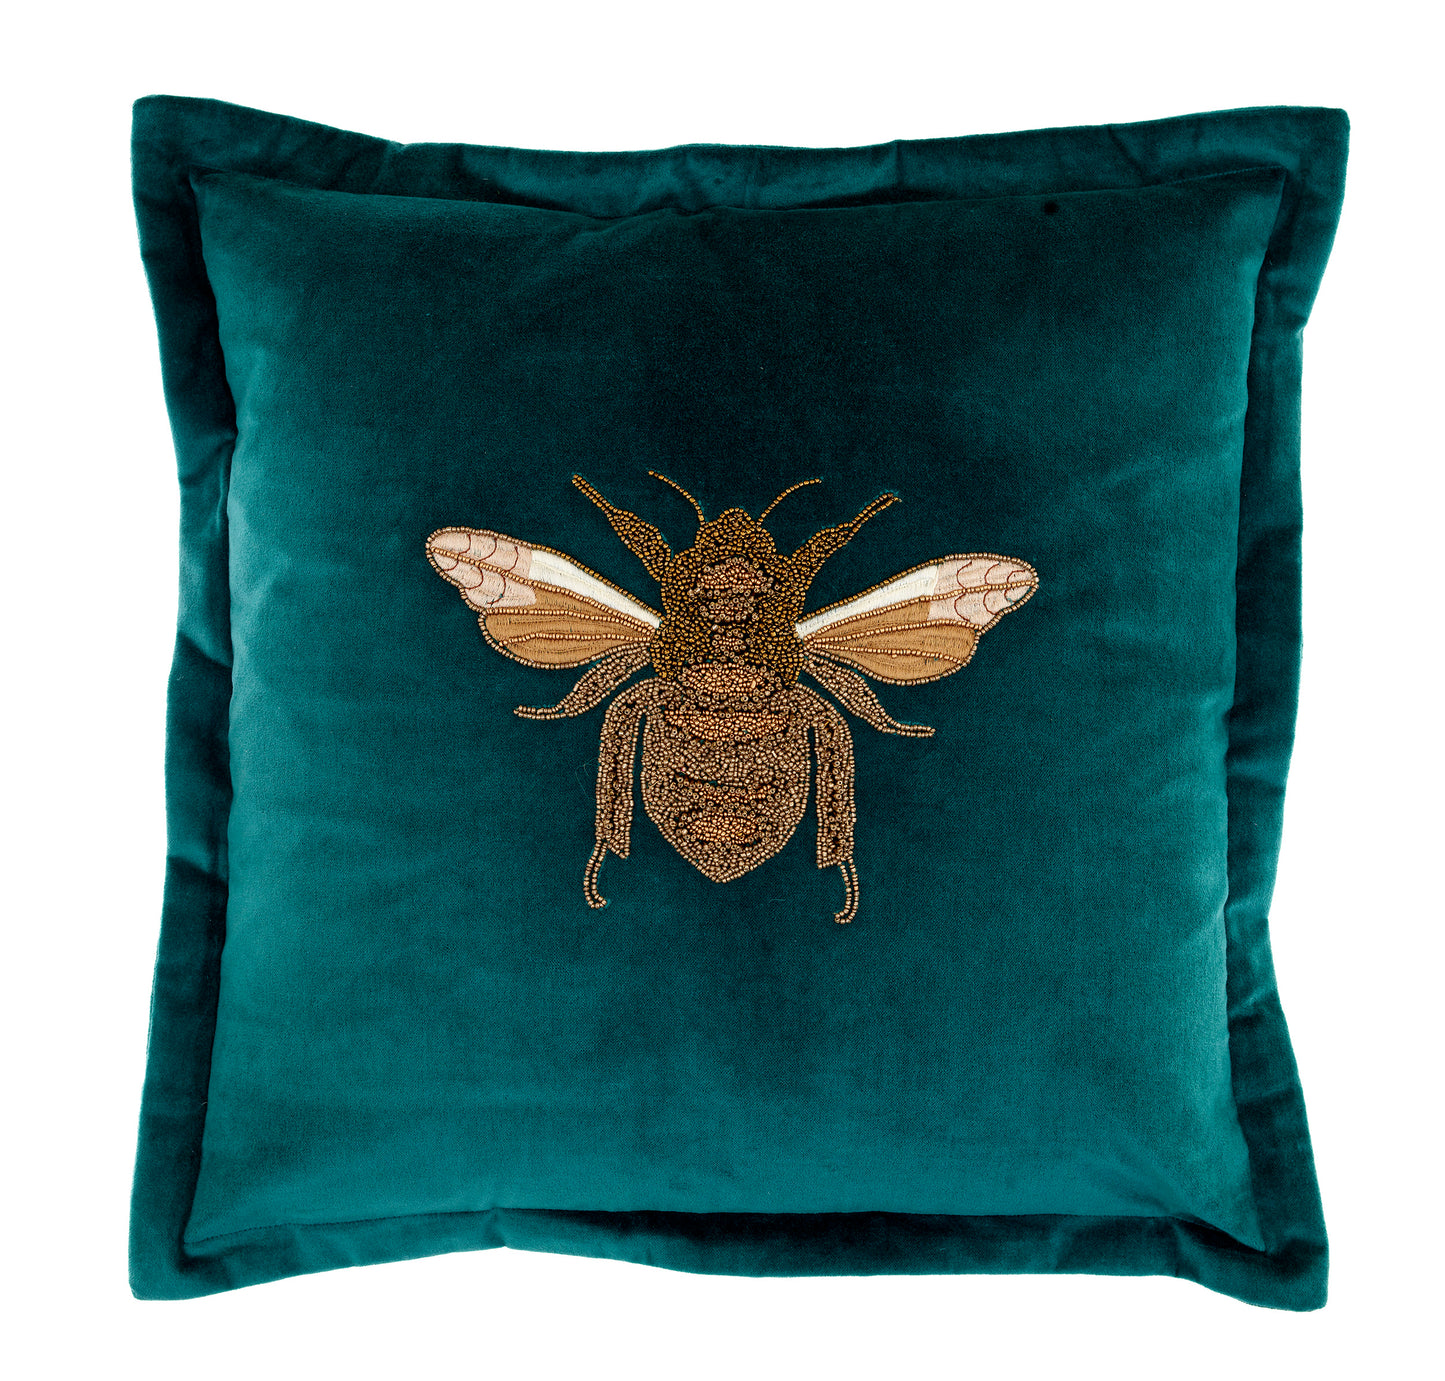 Teal velvet cushion with beaded bee motif 